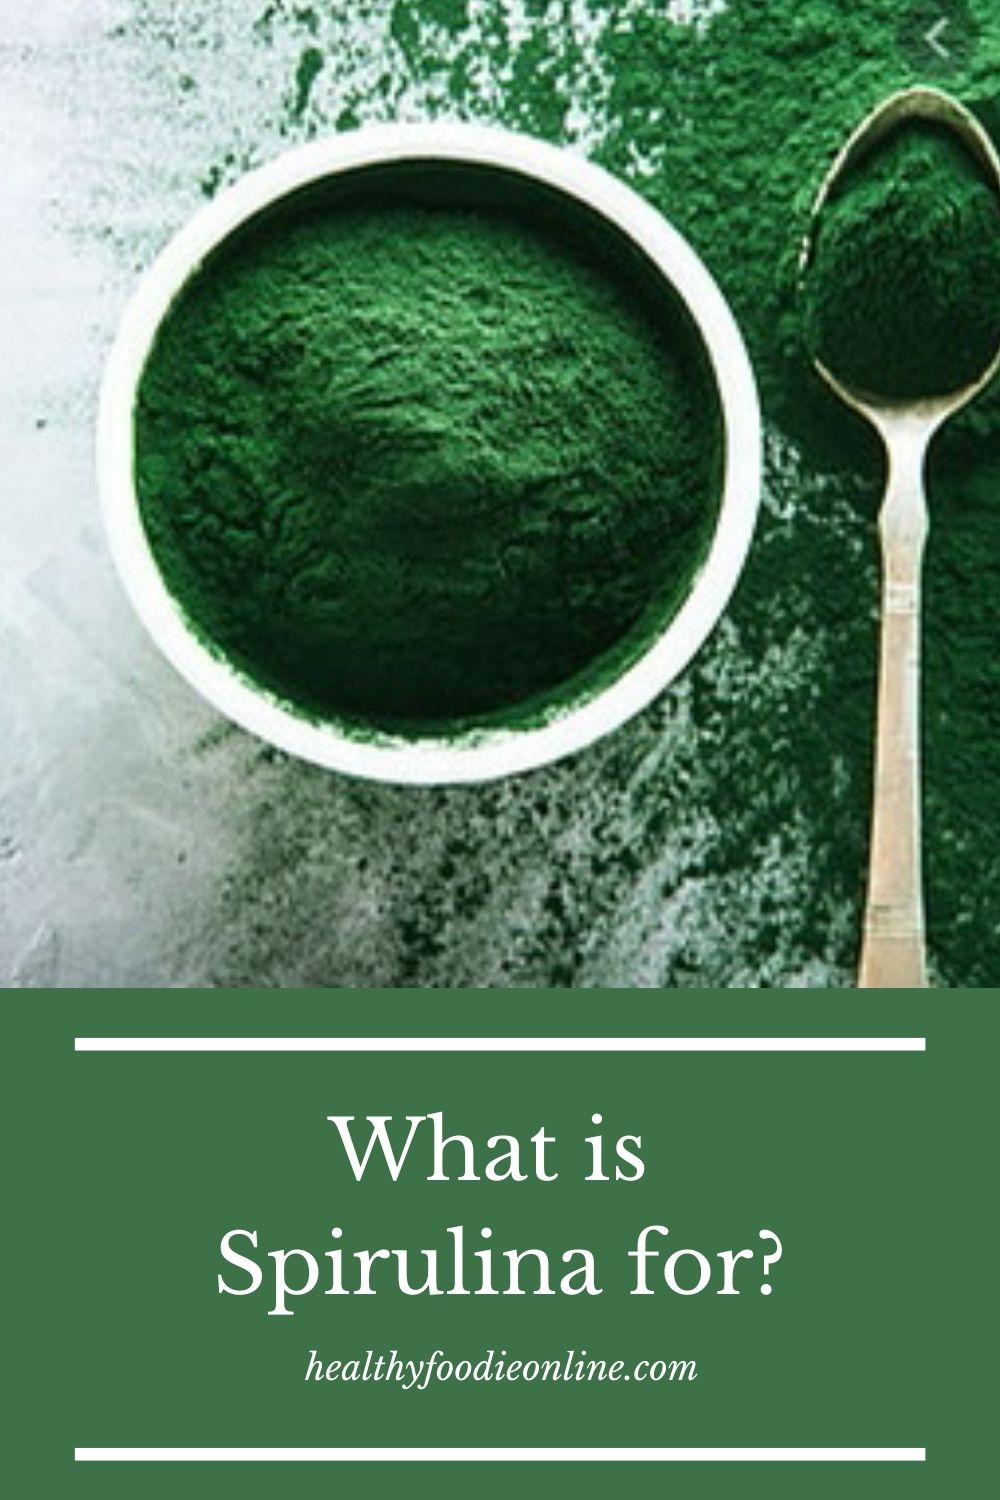 What is Spirulina for?